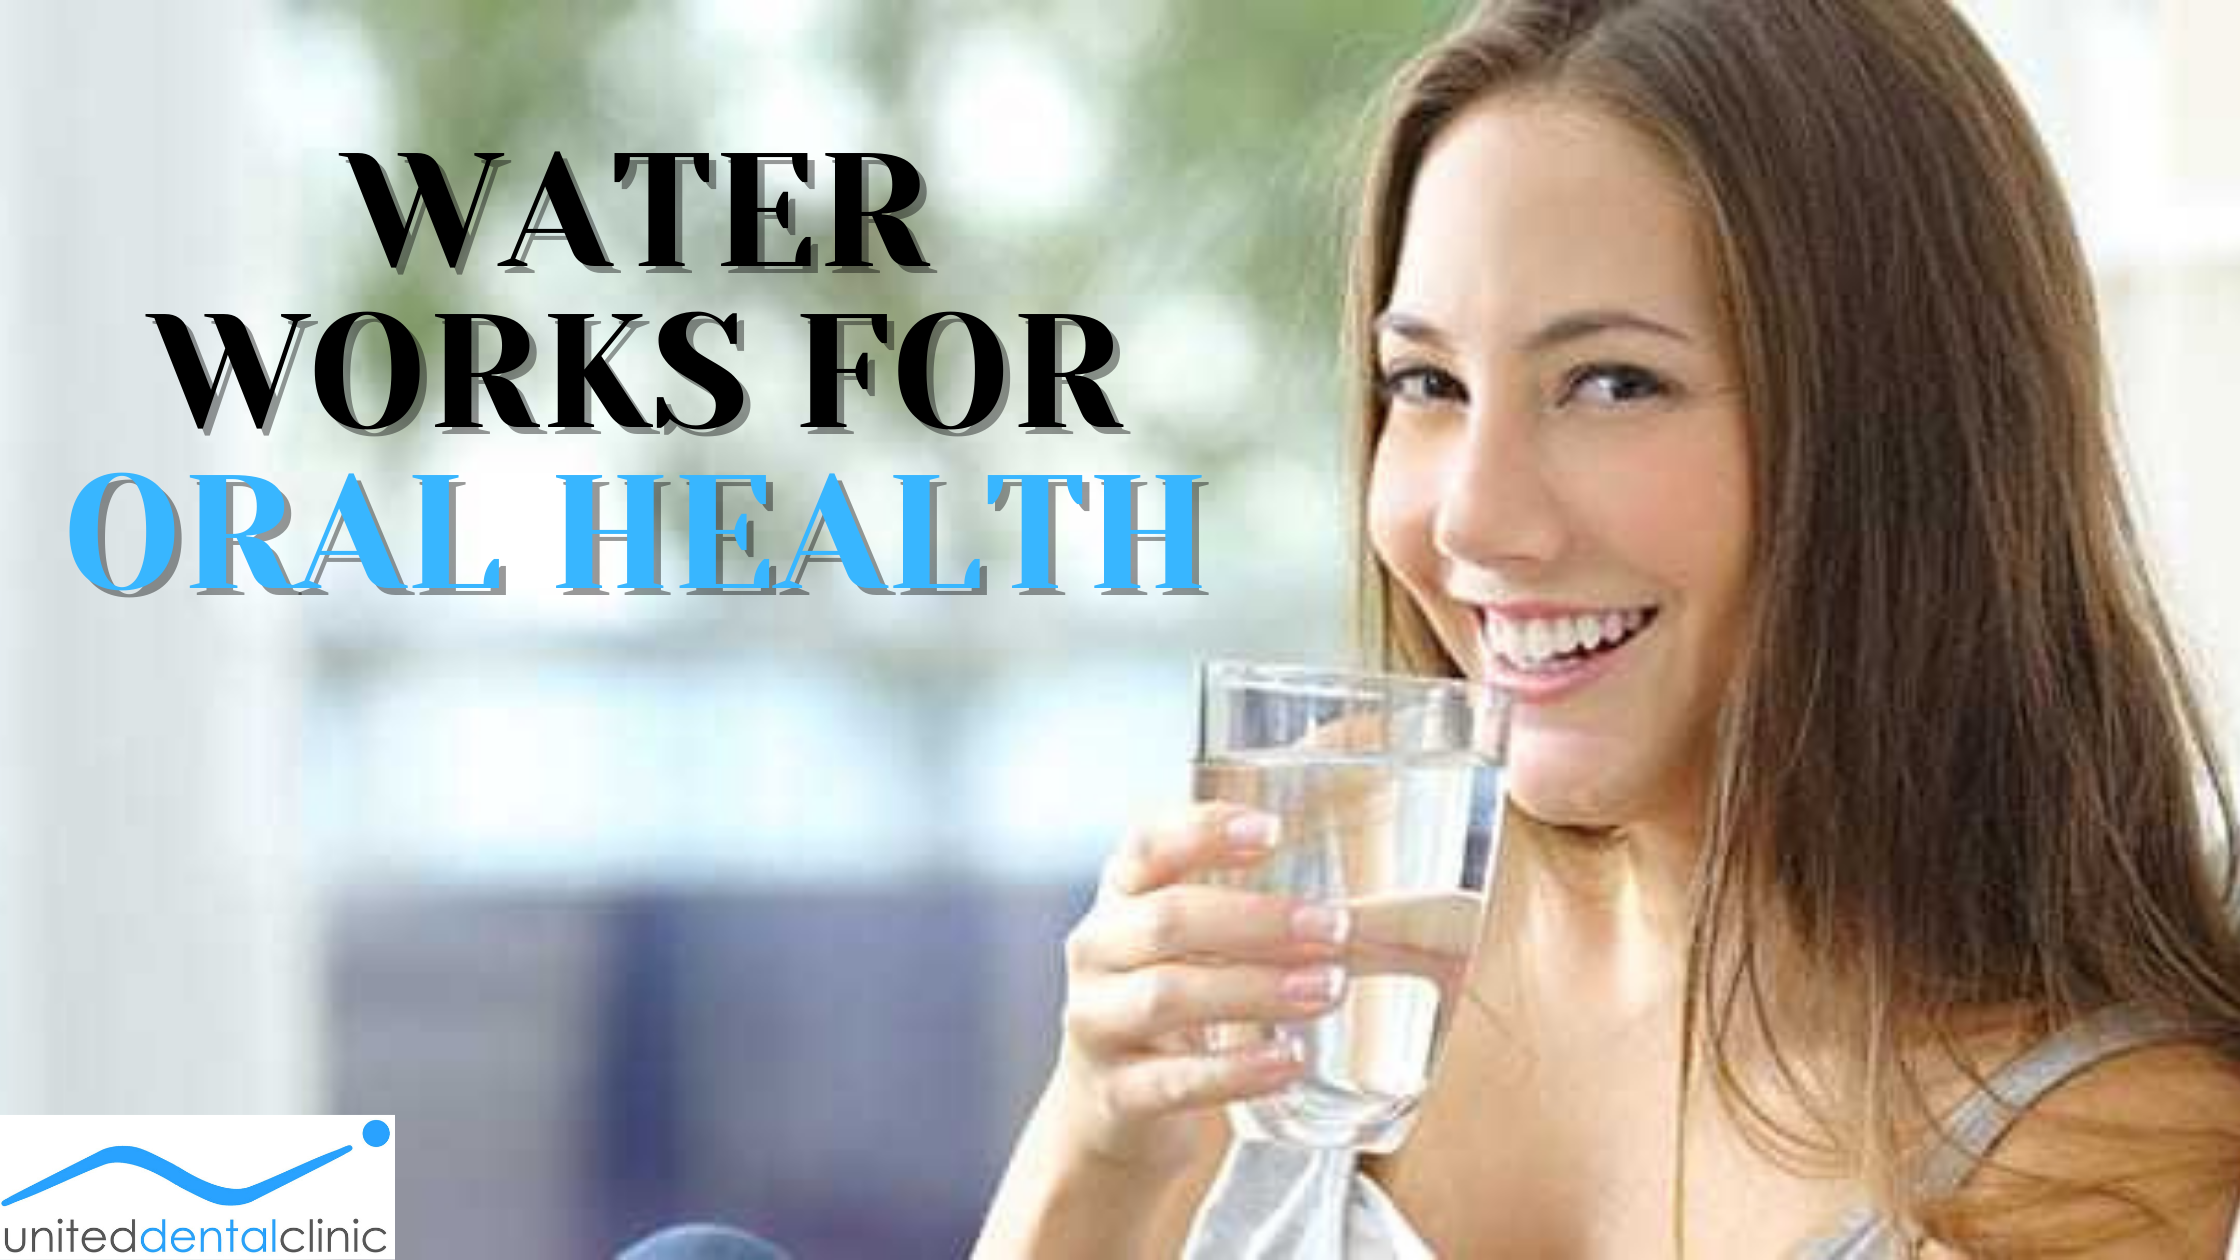 Water works for oral health